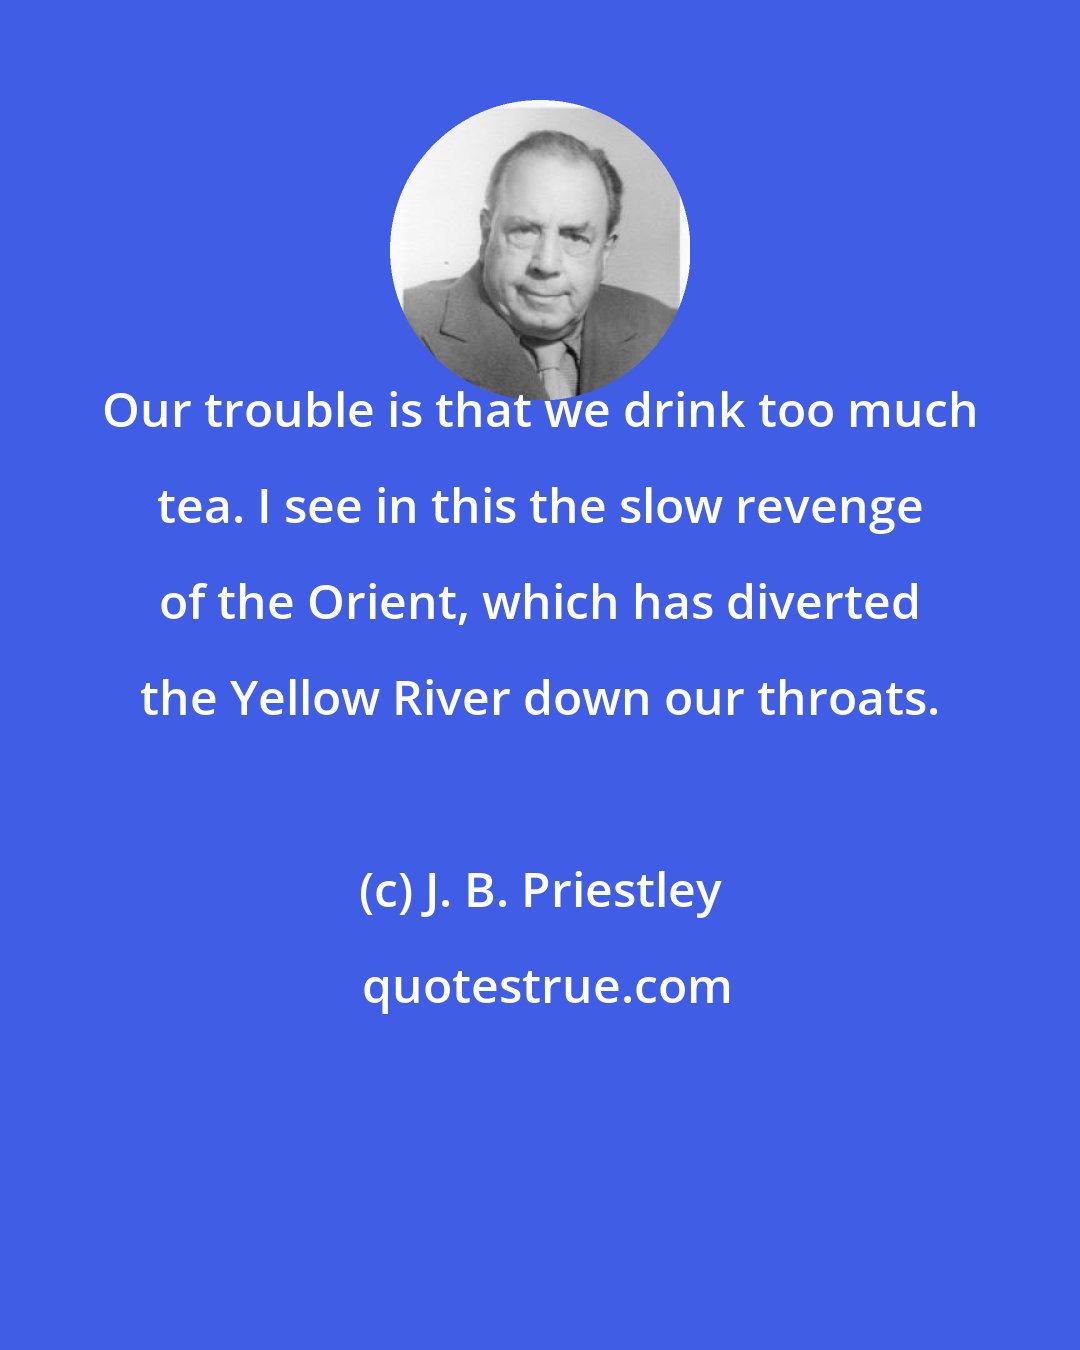 J. B. Priestley: Our trouble is that we drink too much tea. I see in this the slow revenge of the Orient, which has diverted the Yellow River down our throats.